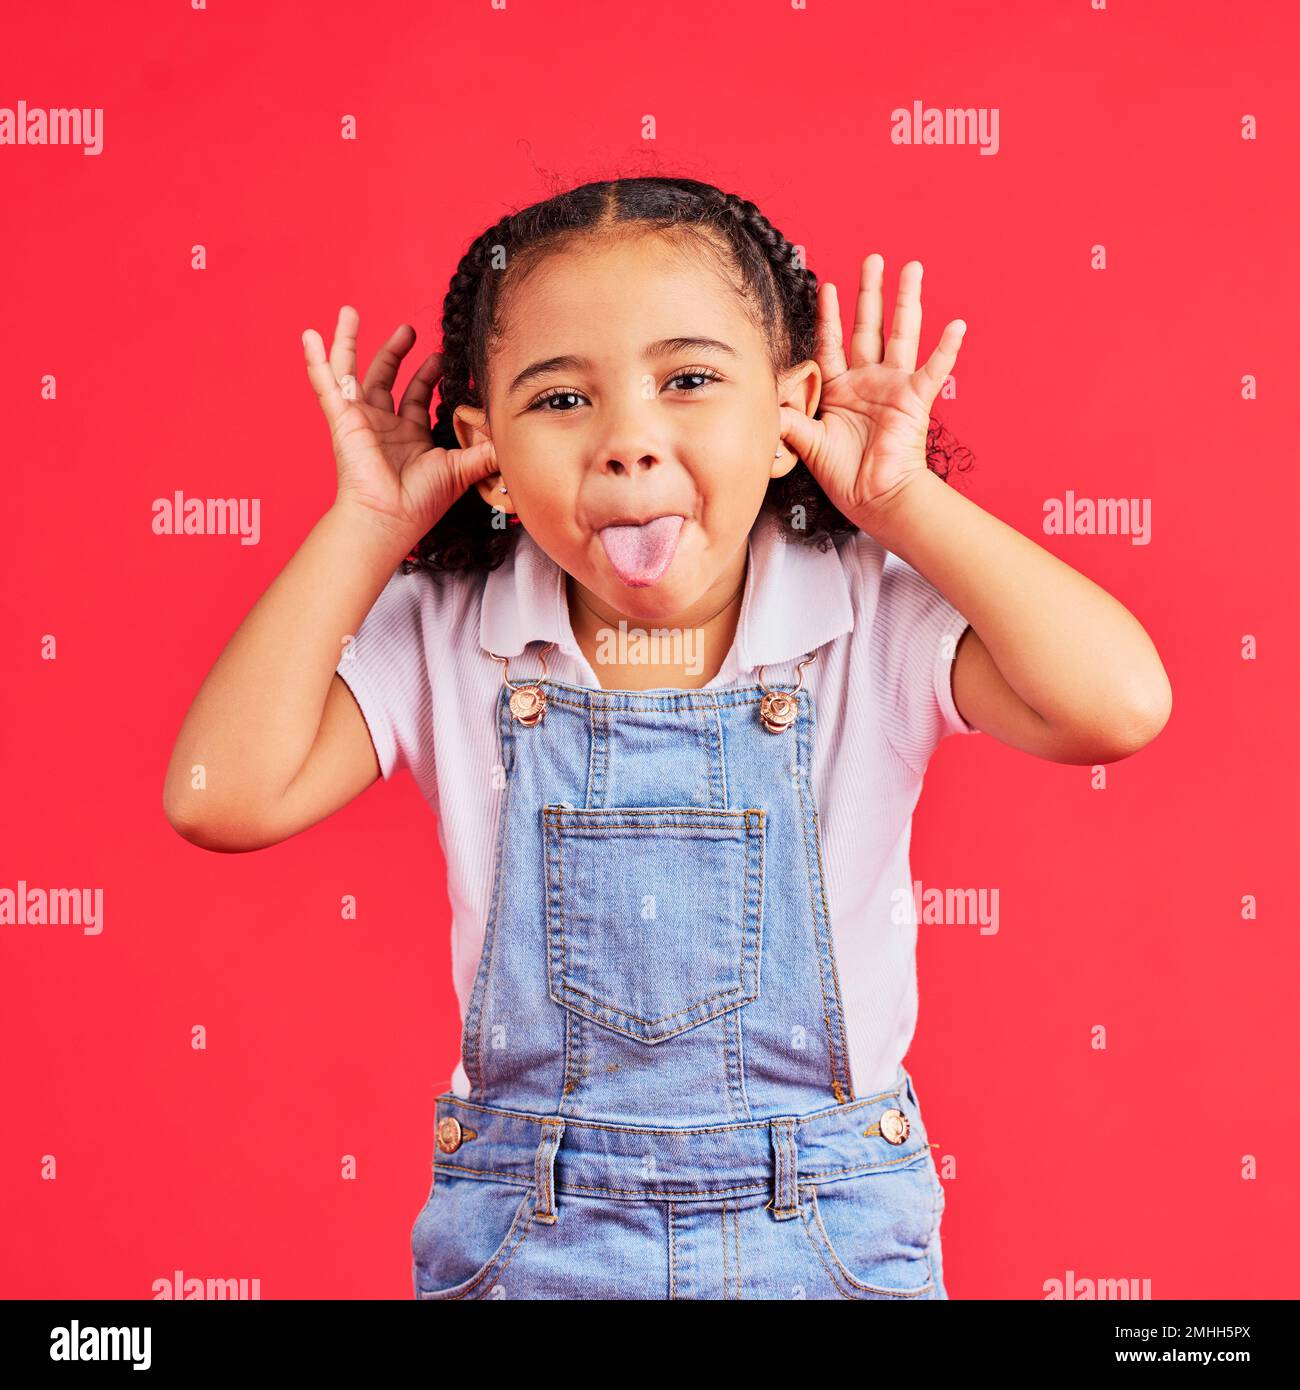 Child, portrait and tongue out on isolated red background in goofy, silly games and playful facial expression. Happy, kid and little girl with funny Stock Photo